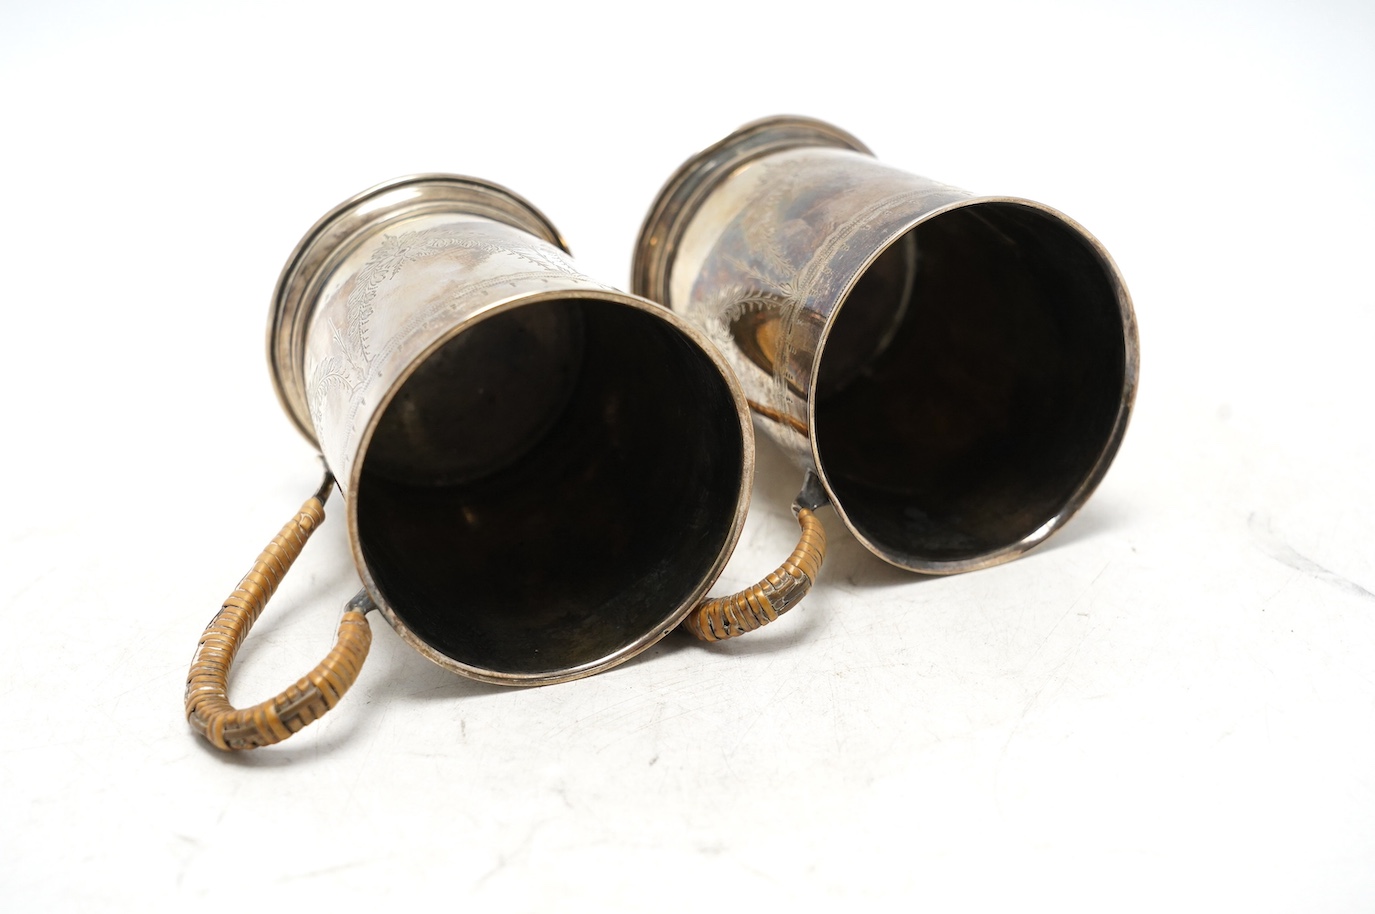 A pair of George V engraved silver mugs, with rattan handles, William Aitken, Birmingham, 1920, height 95mm, gross weight 5.9oz. Condition - fair